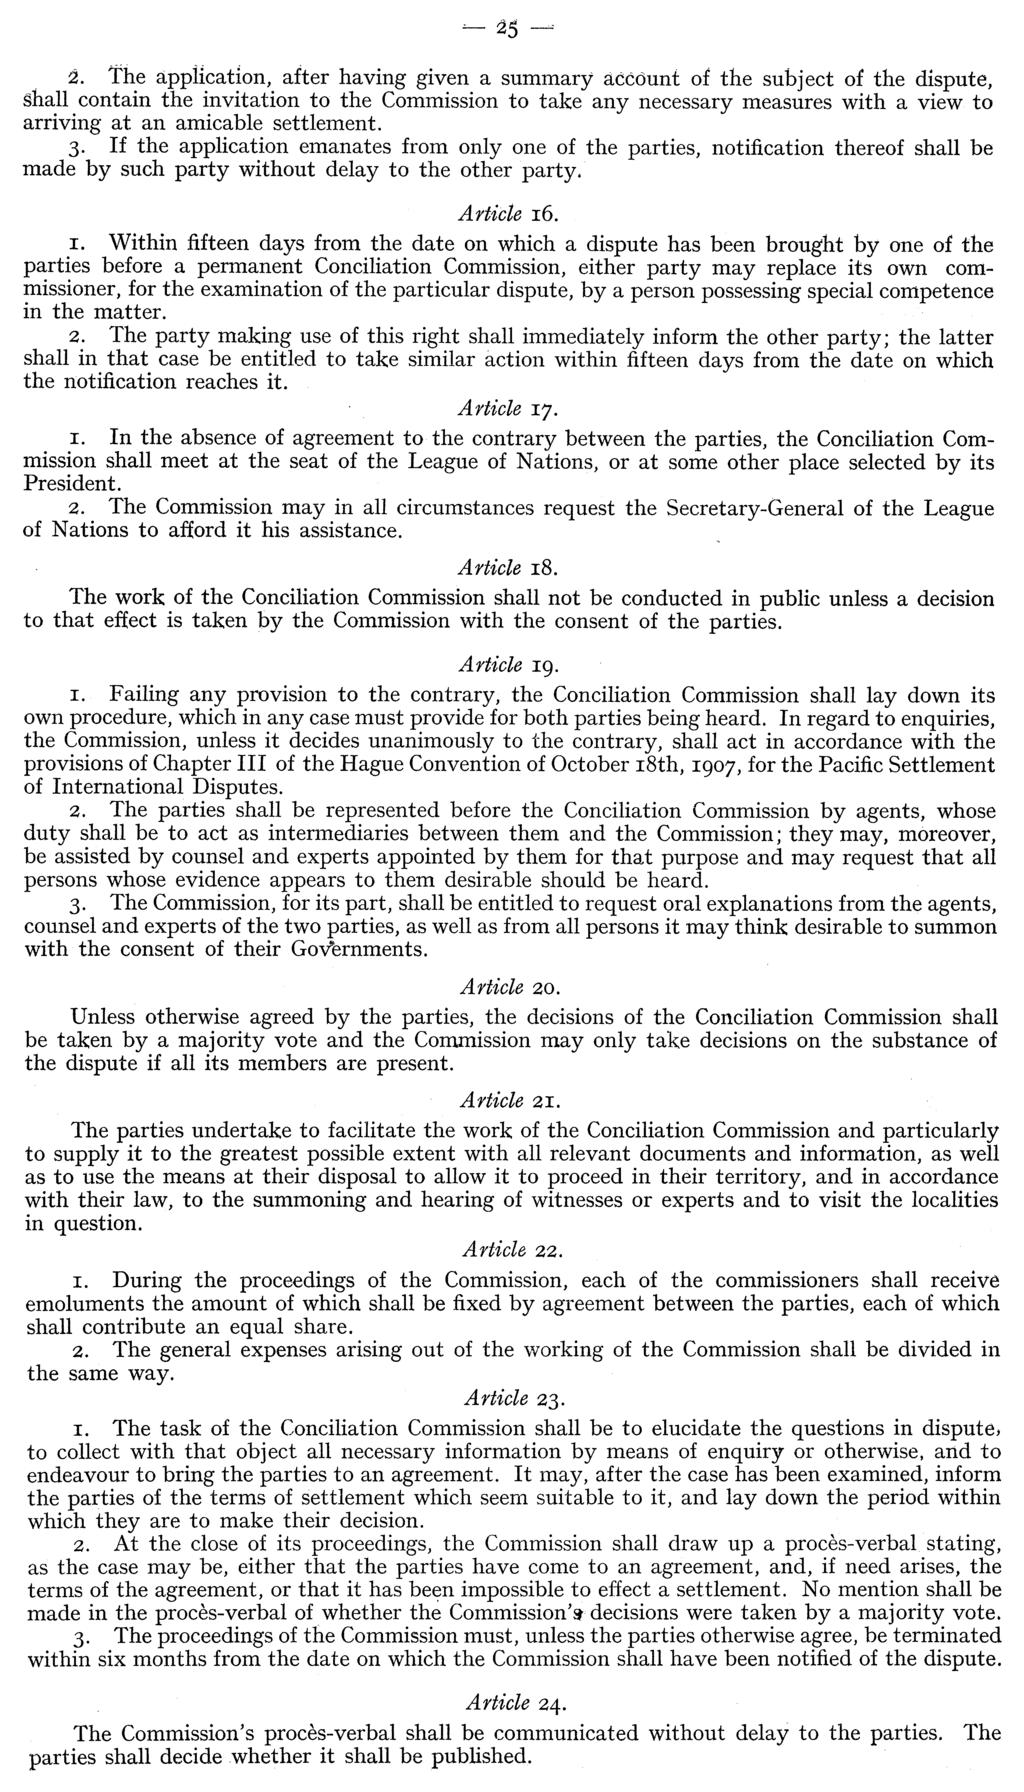 2. The application, after having given a summary account of the subject of the dispute, shall contain the invitation to the Commission to take any necessary measures with a view to arriving at an